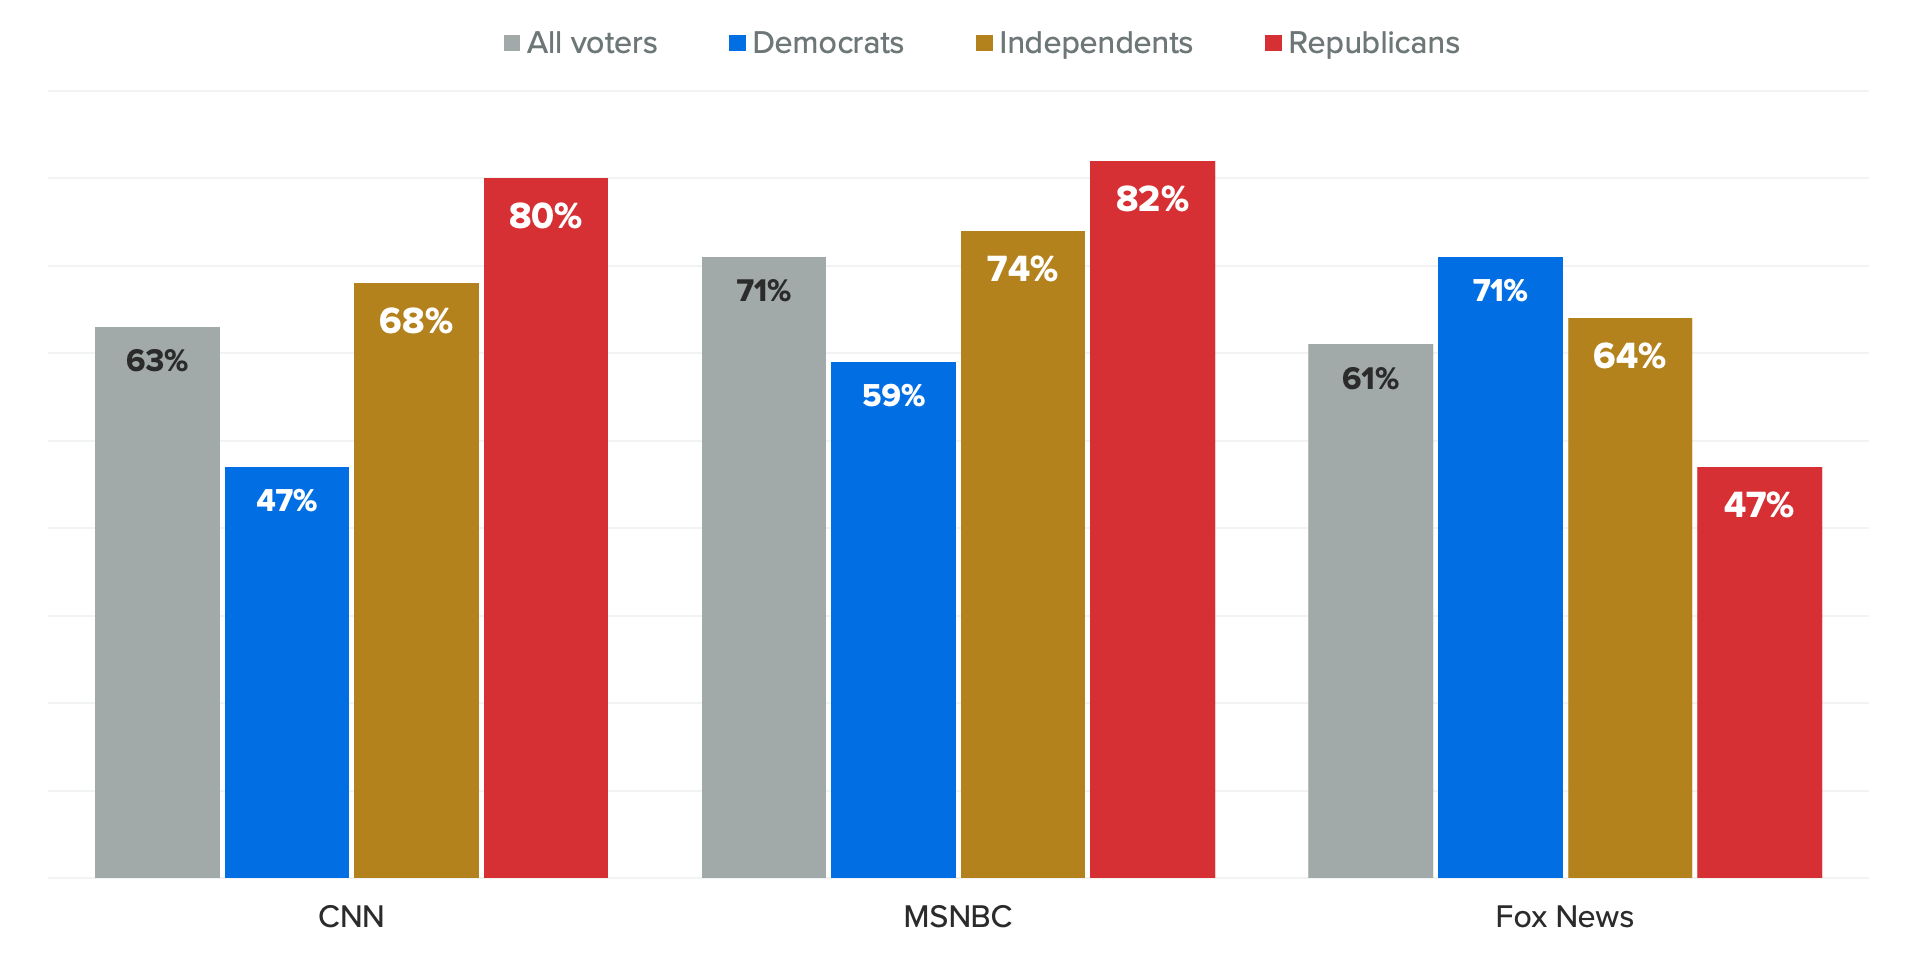 Bar chart of the party affiliation of voters who never use the major cable networks, showing roughly 3 in 5 voters don't use CNN or Fox News, and even more say the same of MSNBC.